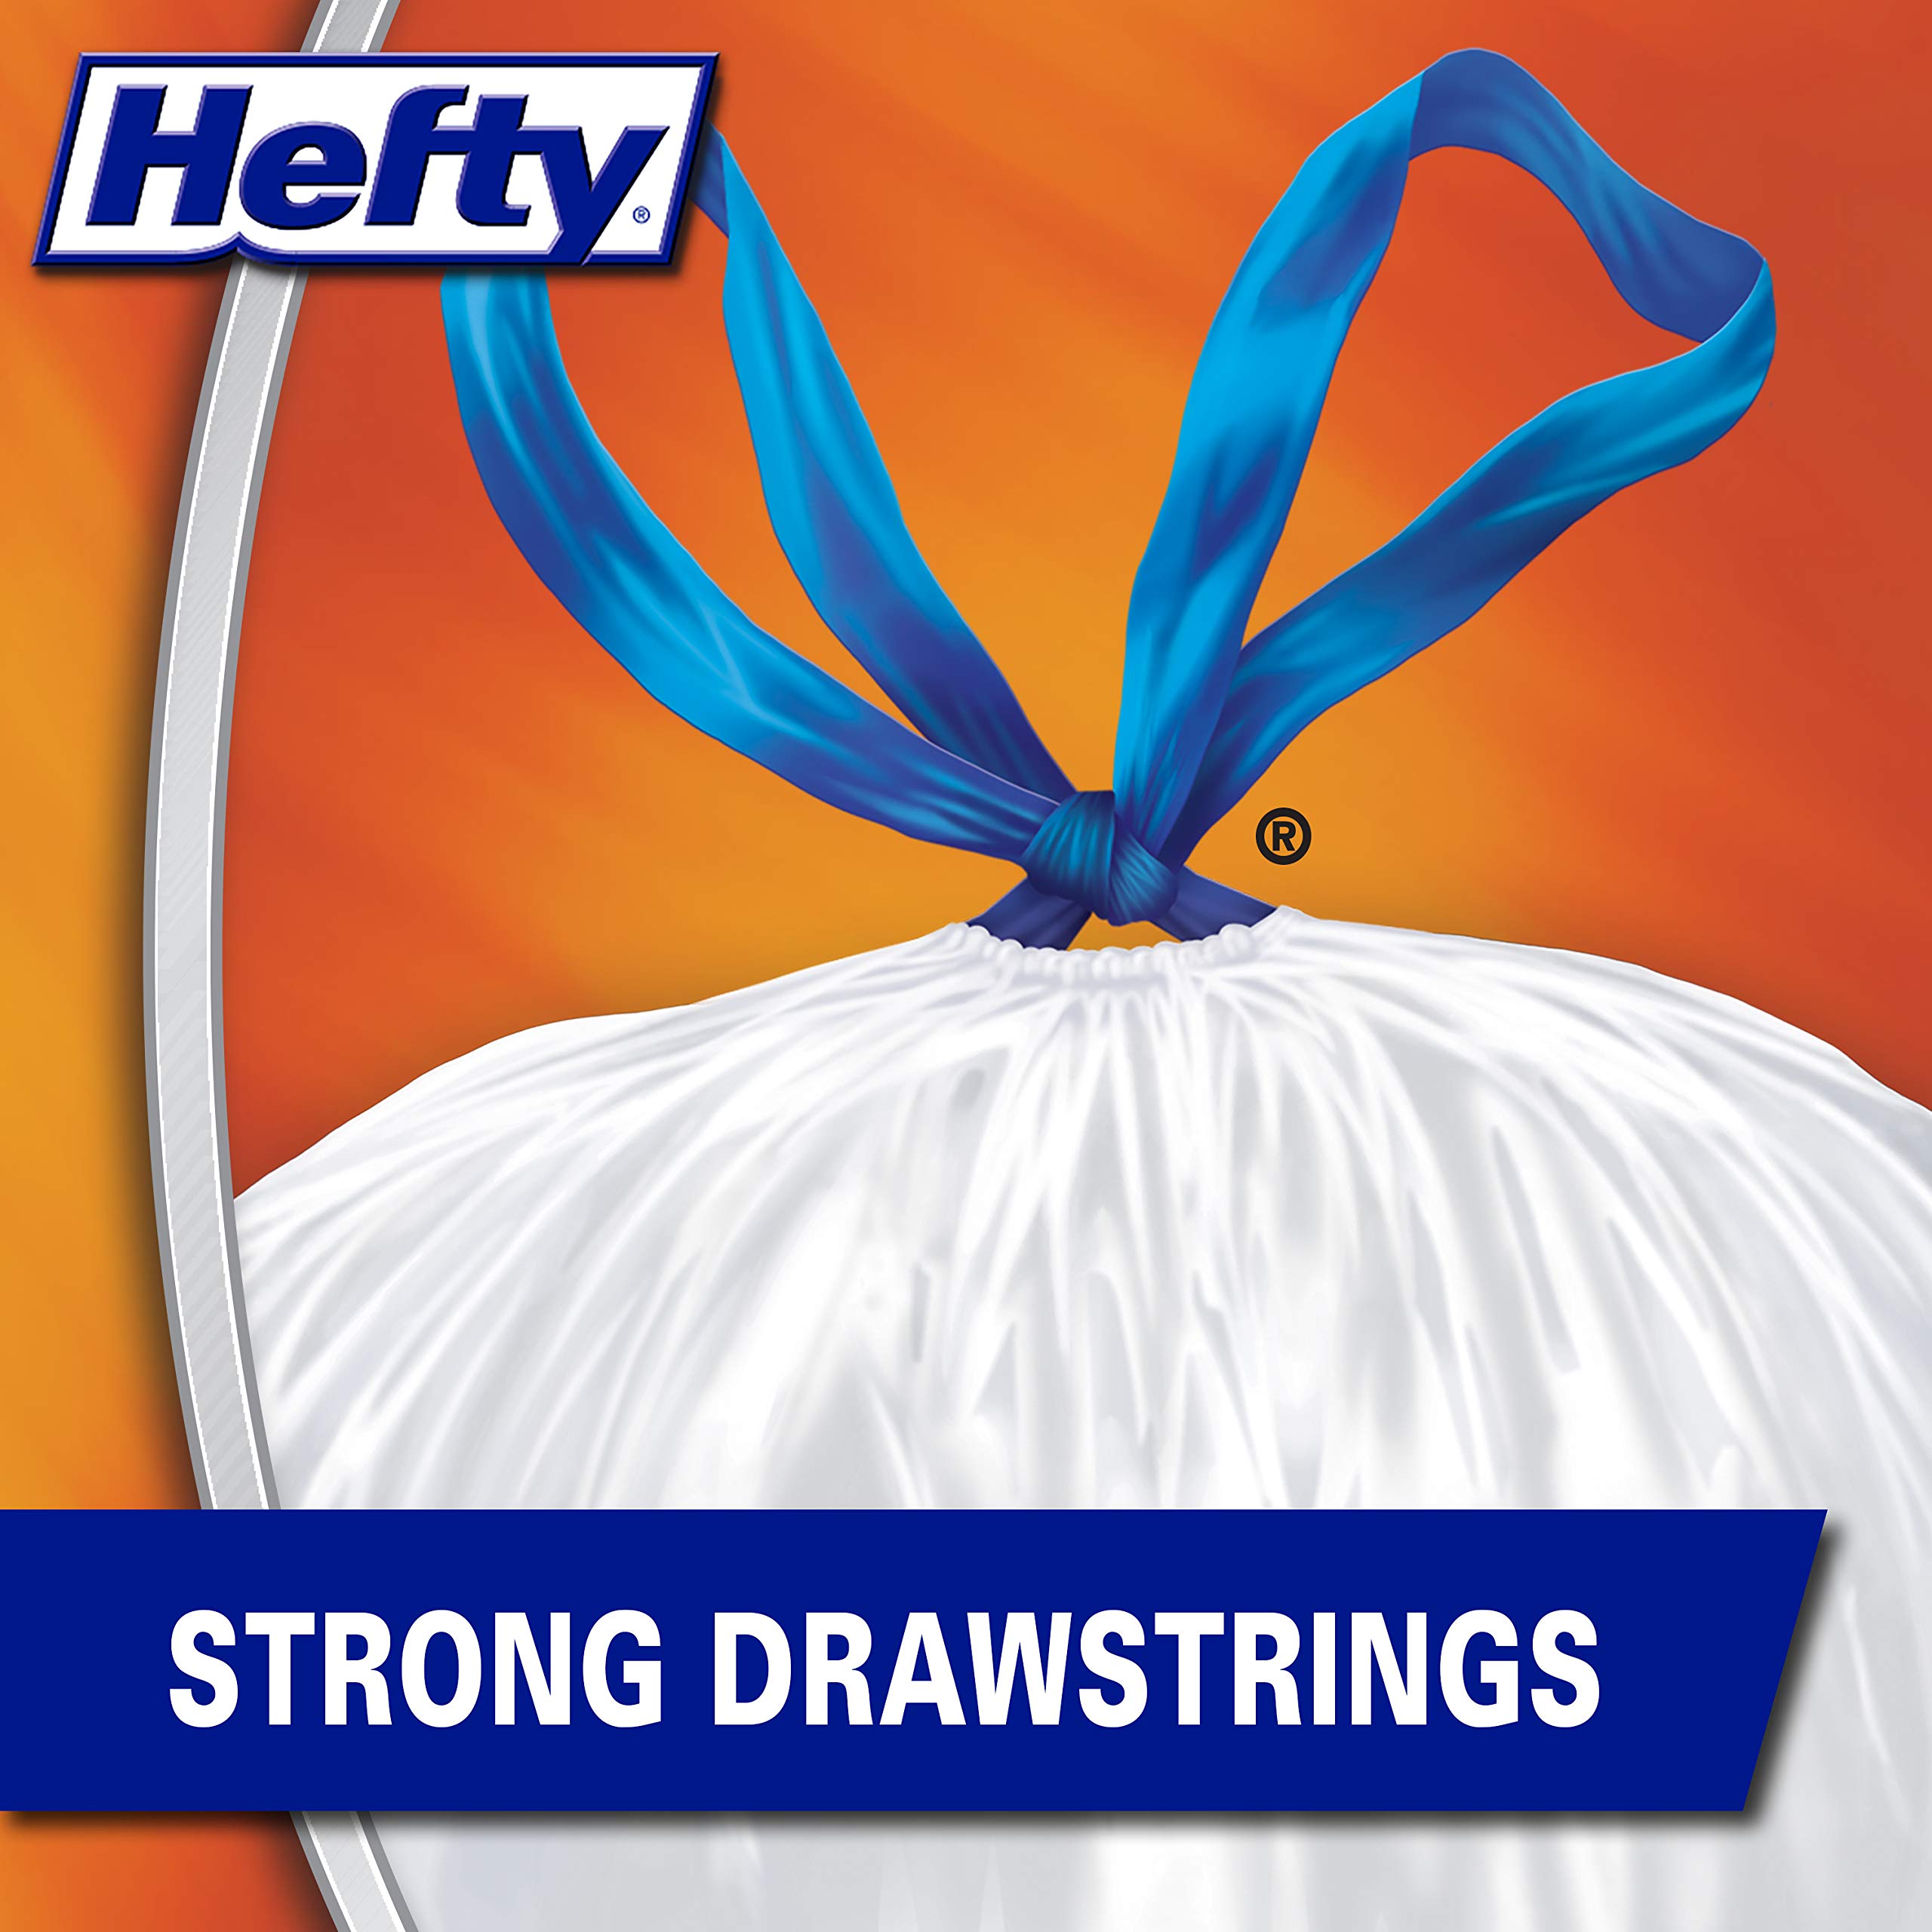 Hefty Strong Tall Kitchen Trash Bags, Unscented, 13 Gallon, 90 Count, White,Packaging may vary